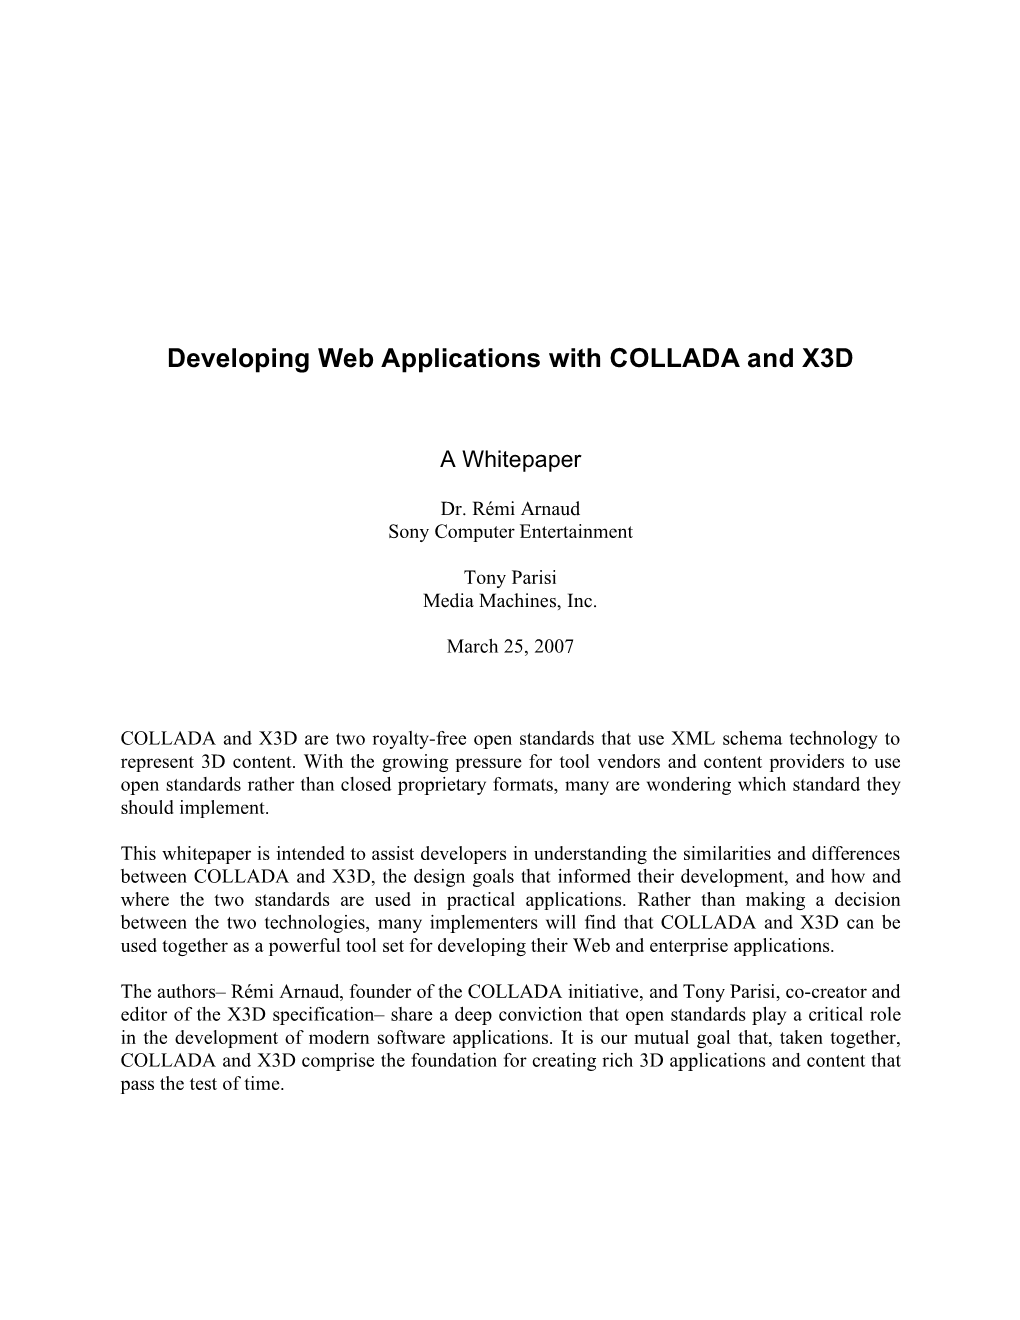 Developing Web Applications with COLLADA and X3D